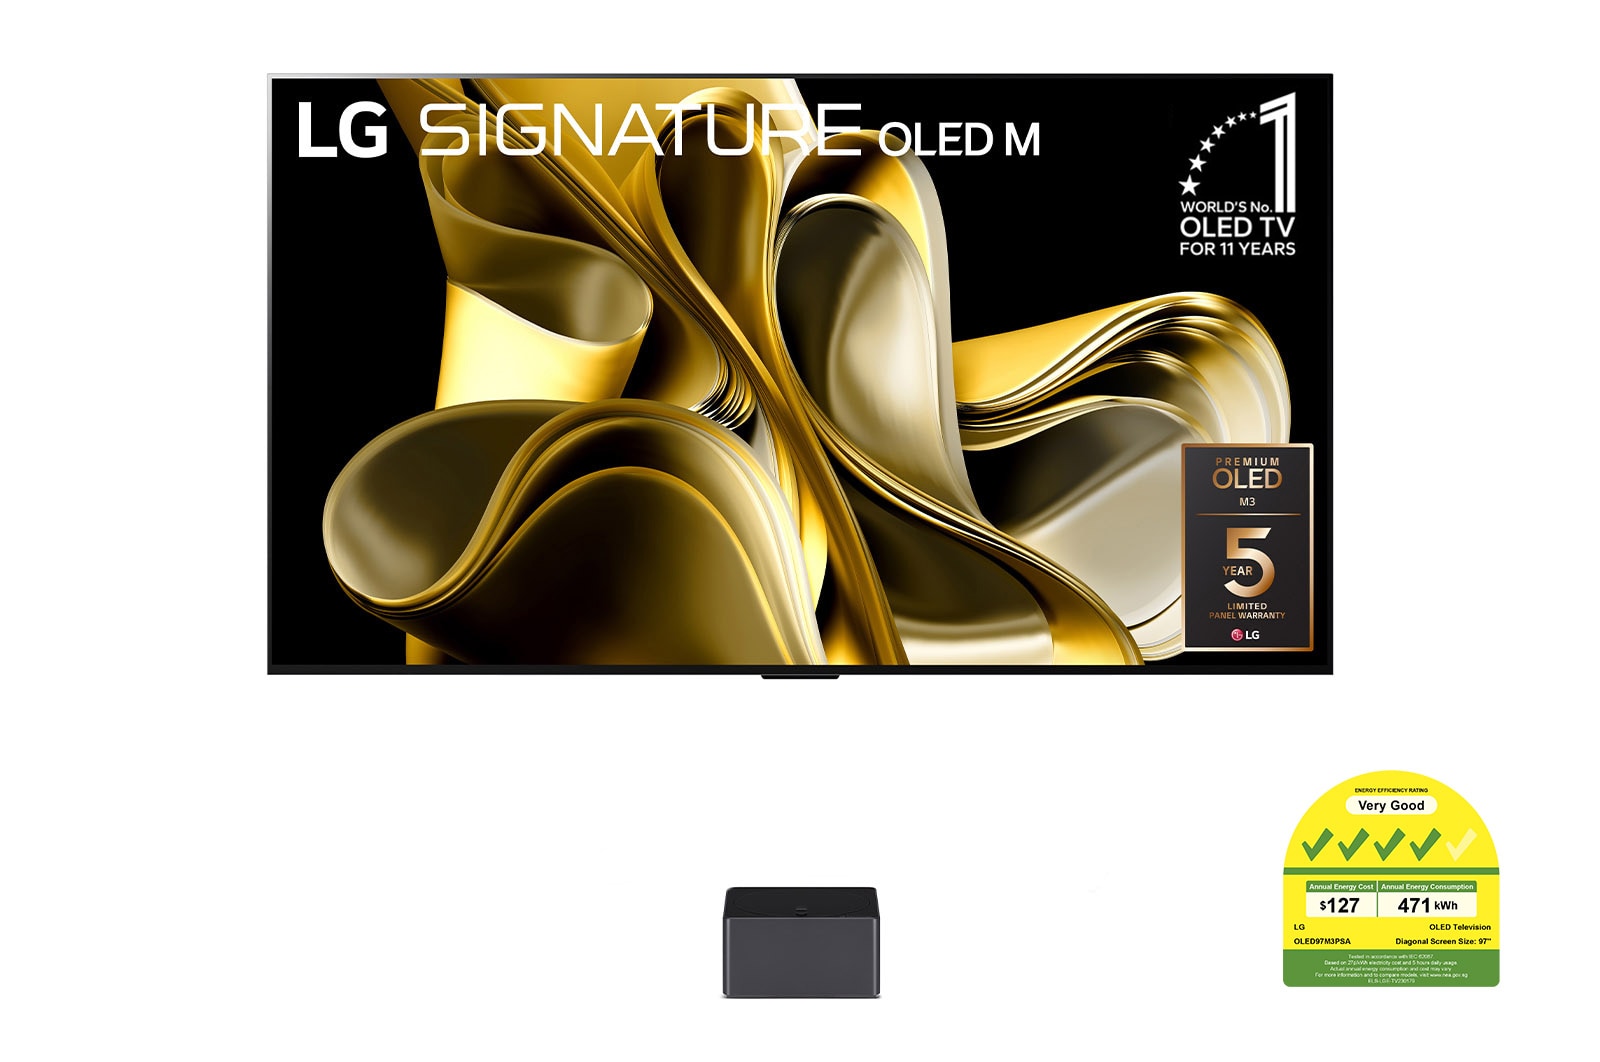 Front view with LG OLED M3 on the stand and Zero Connect Box below, 10 Years World No.1 OLED Emblem, LG Signiture OLED M, and 5-Year Panel Warranty logo on screen